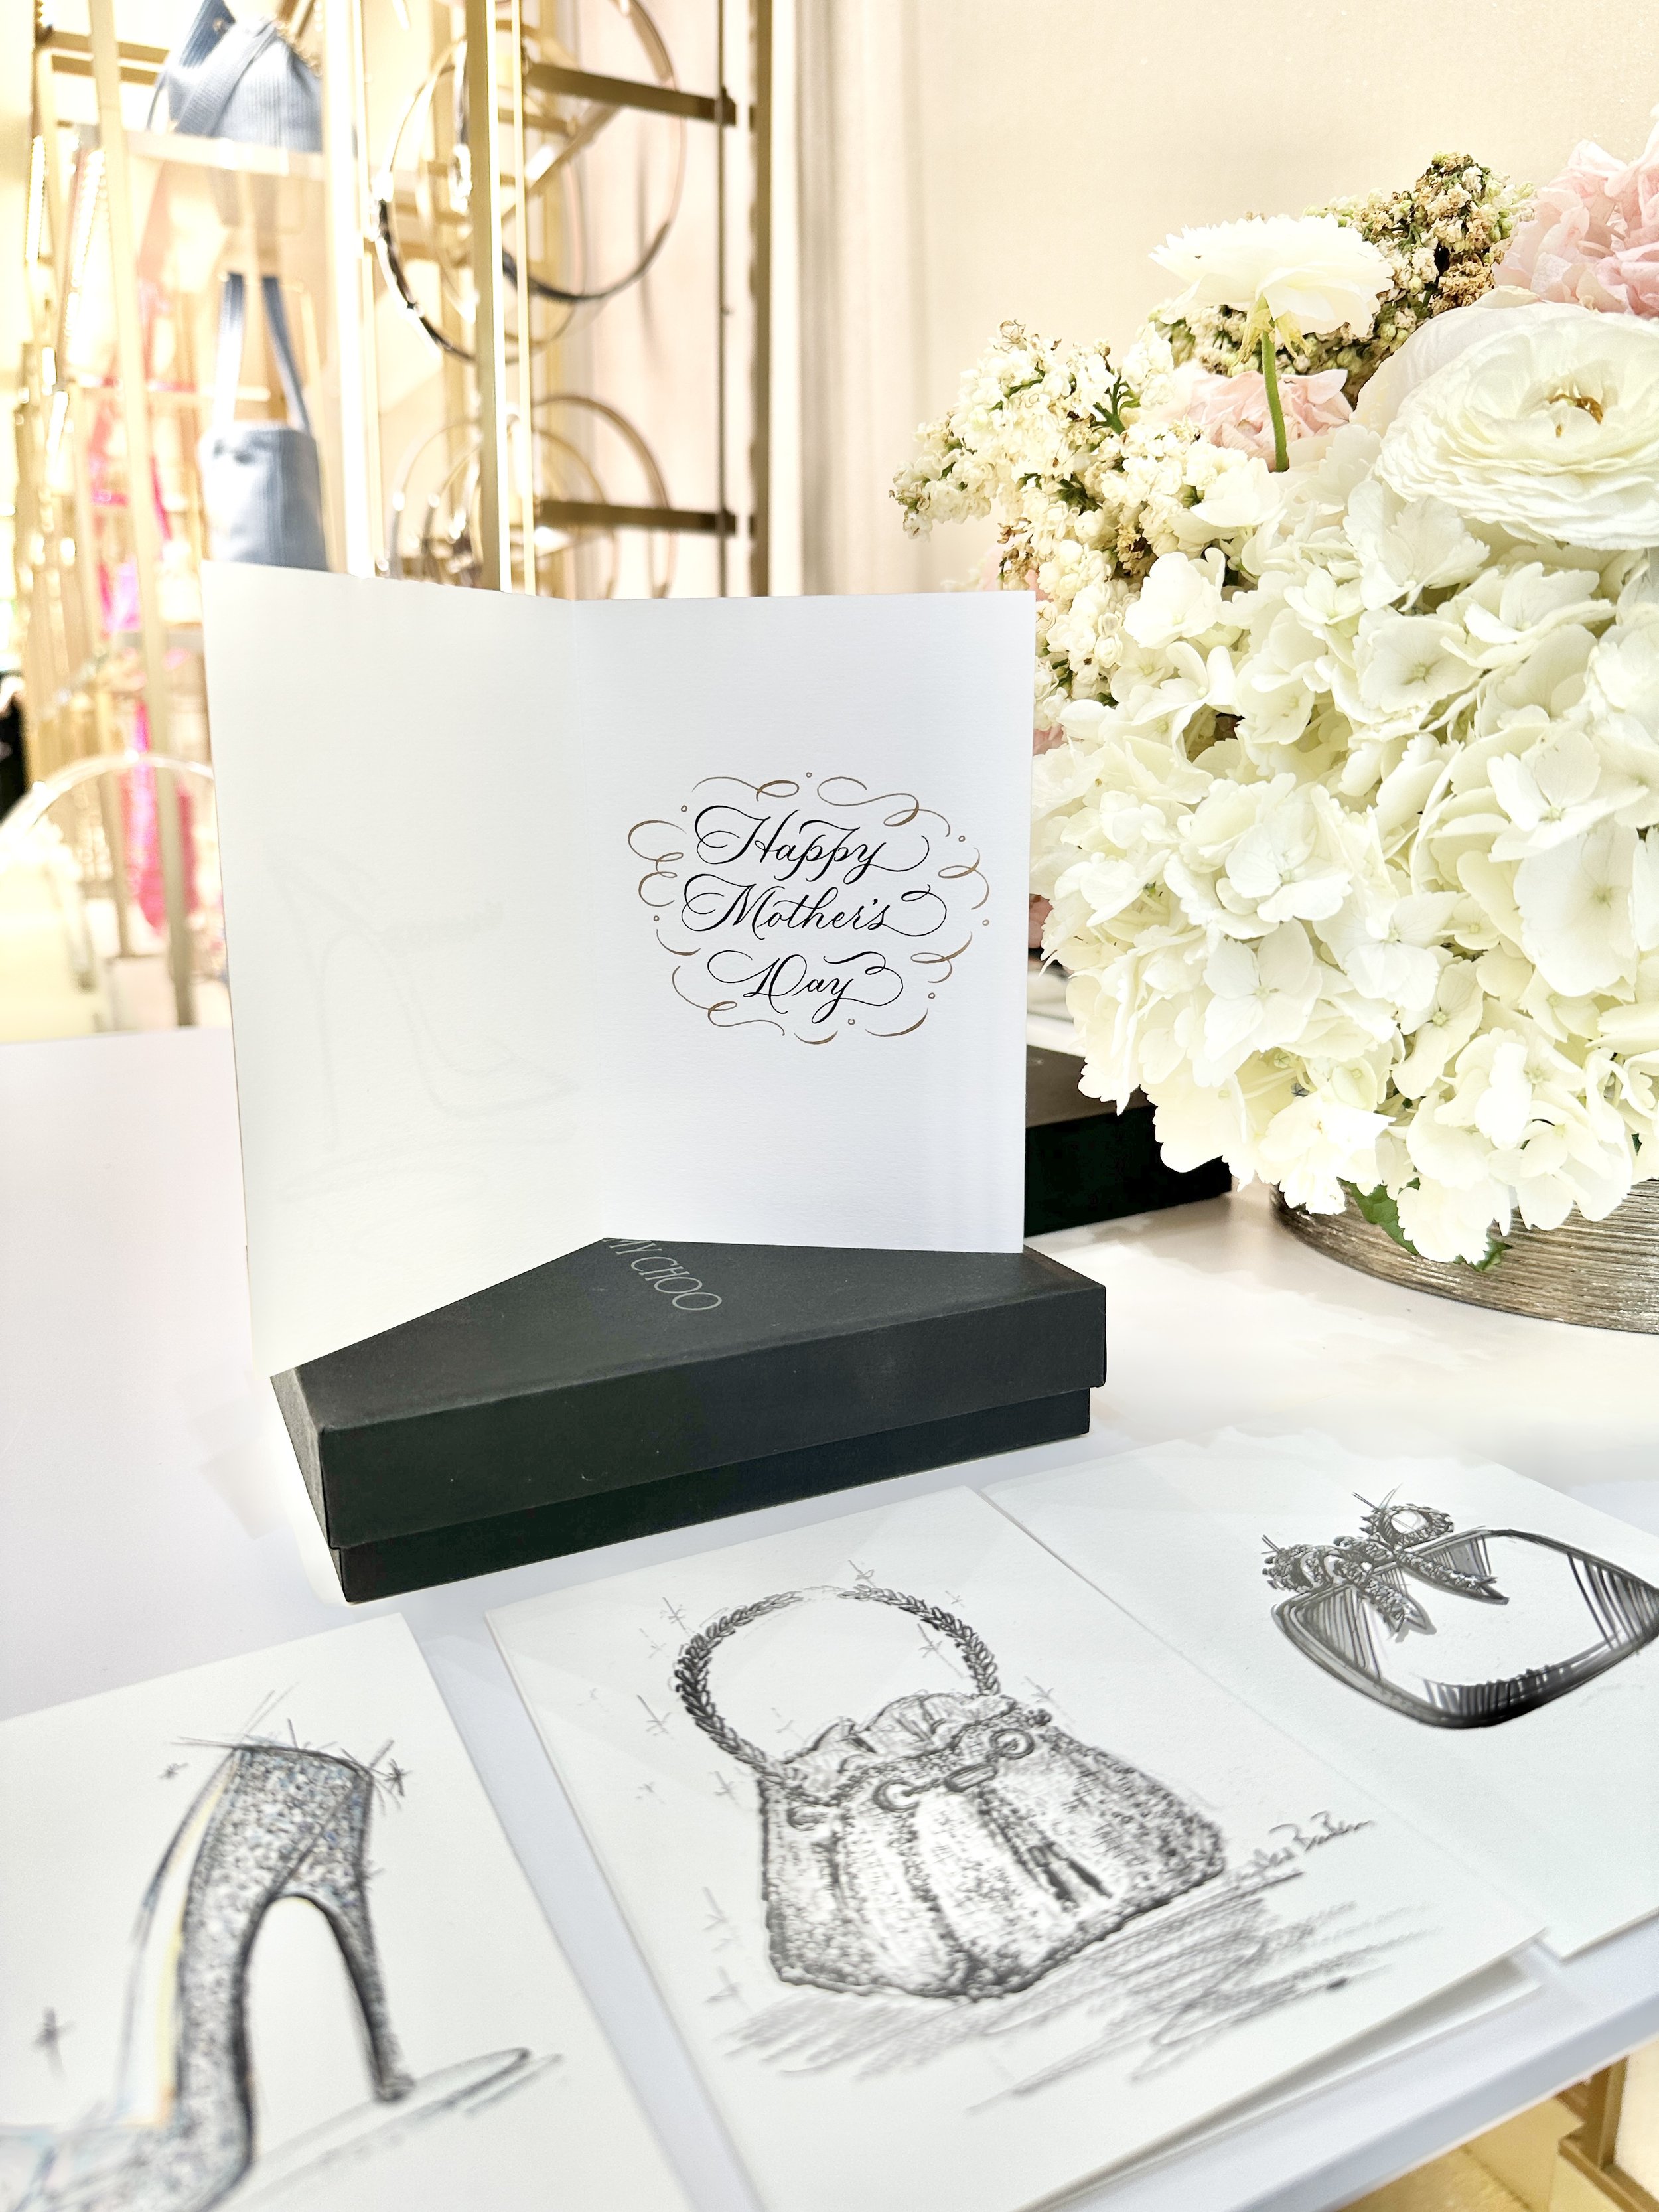 Personalized cards - Jimmy Choo (Beverly Hills)